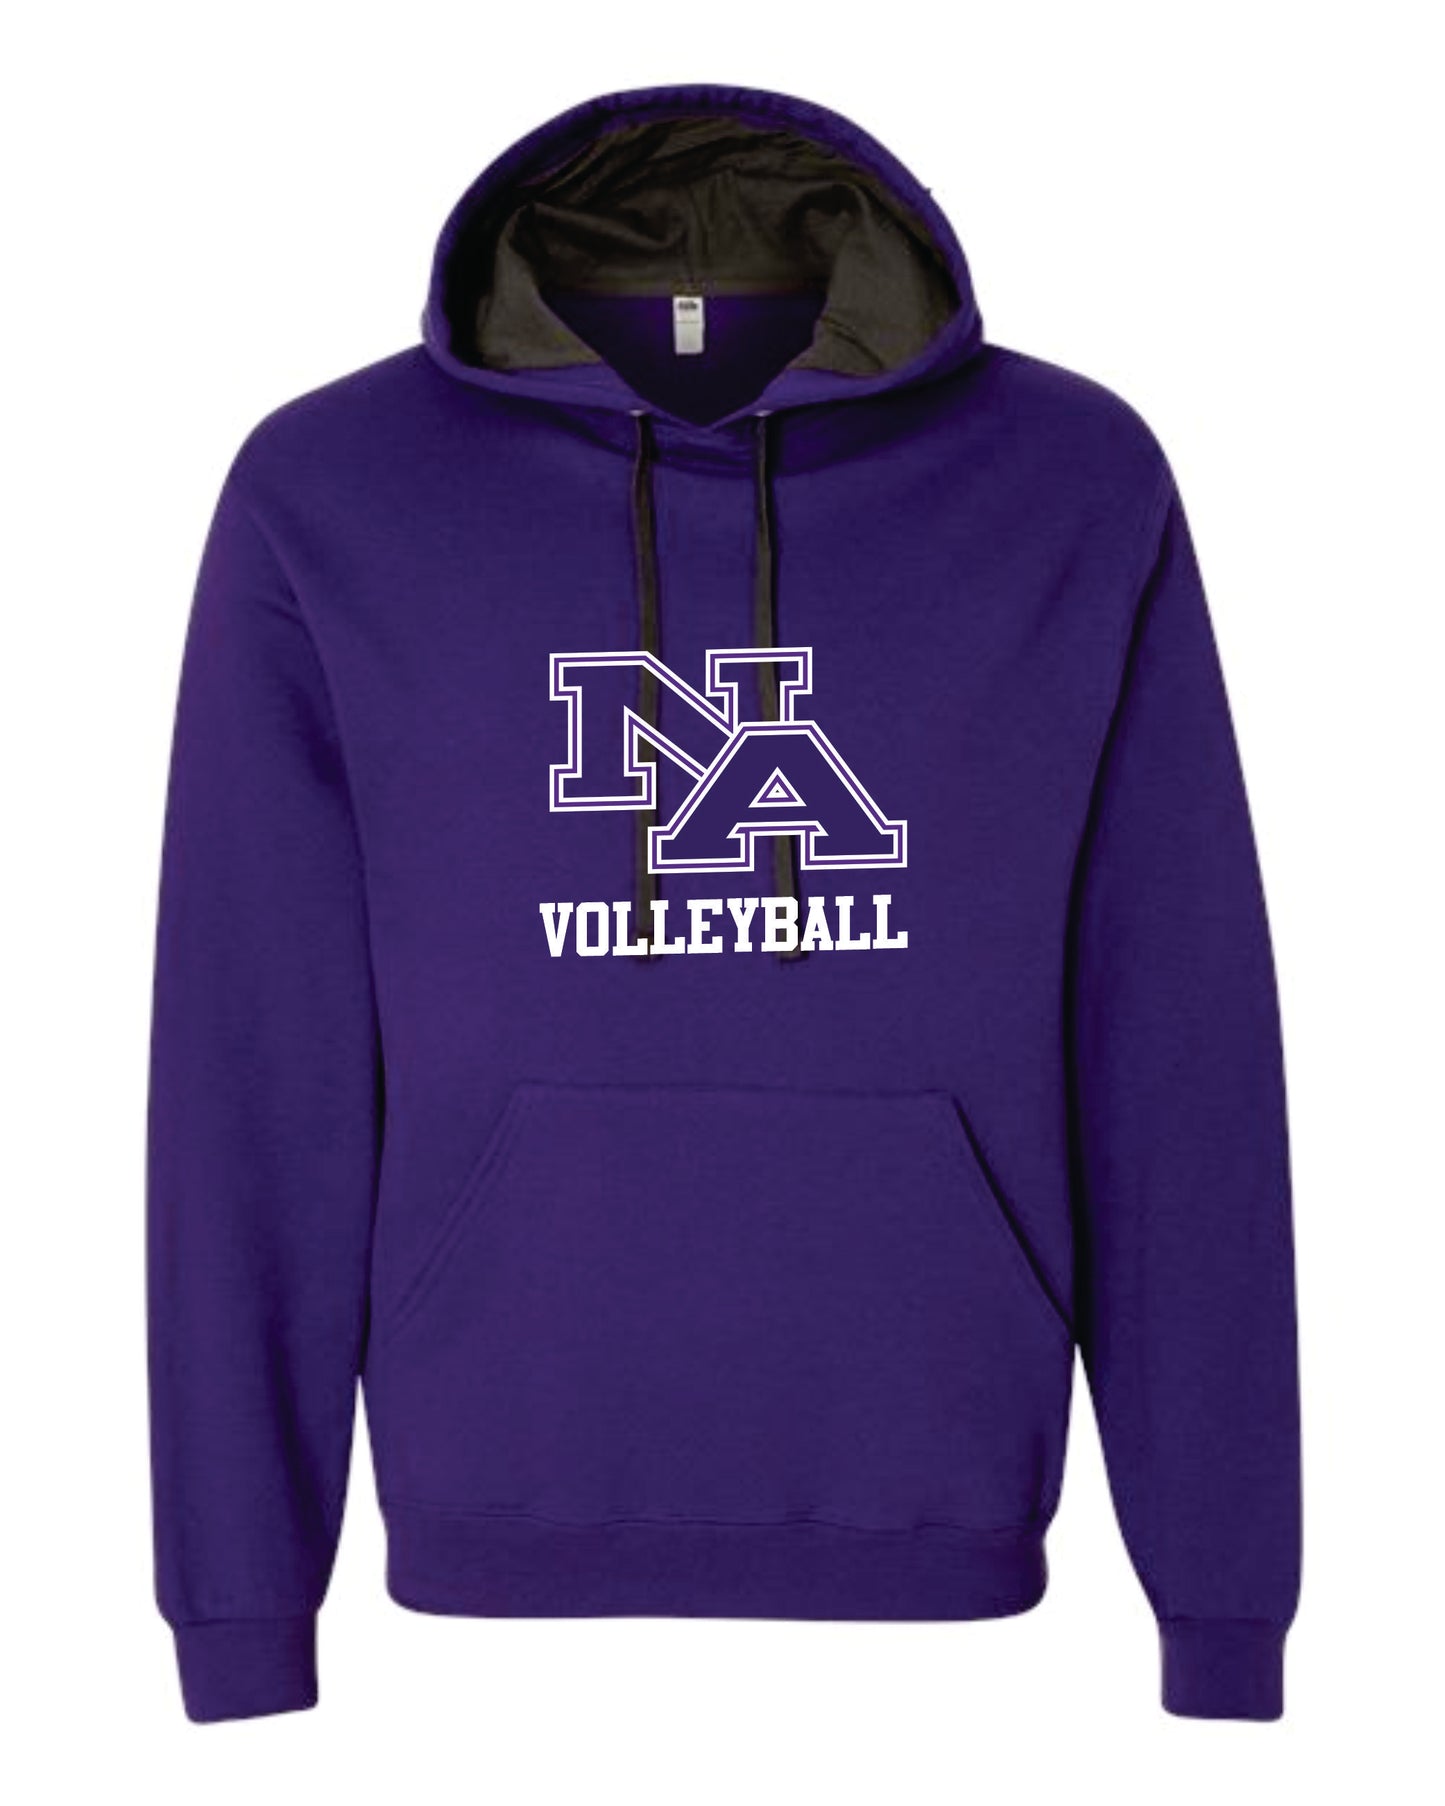 Volleyball Fruit of the Loom Sofspun Hoodie (3 colors)